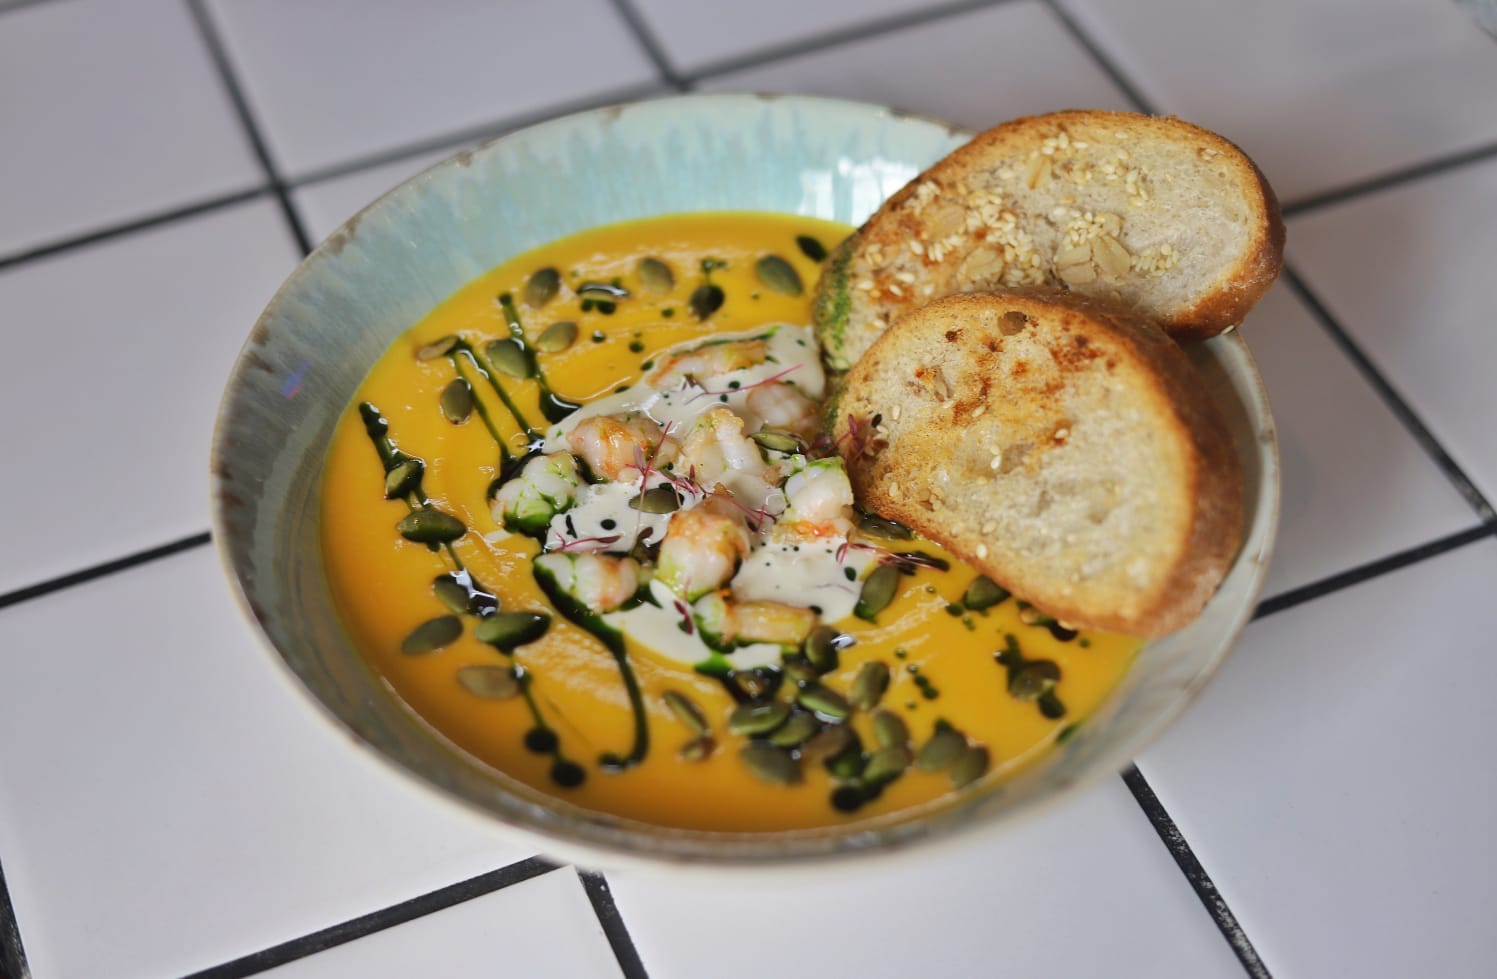 Pumpkin soup with tiger prawns in fragrant herbs, Stracciatella cheese, ciabatta croutons and pumpkin seeds